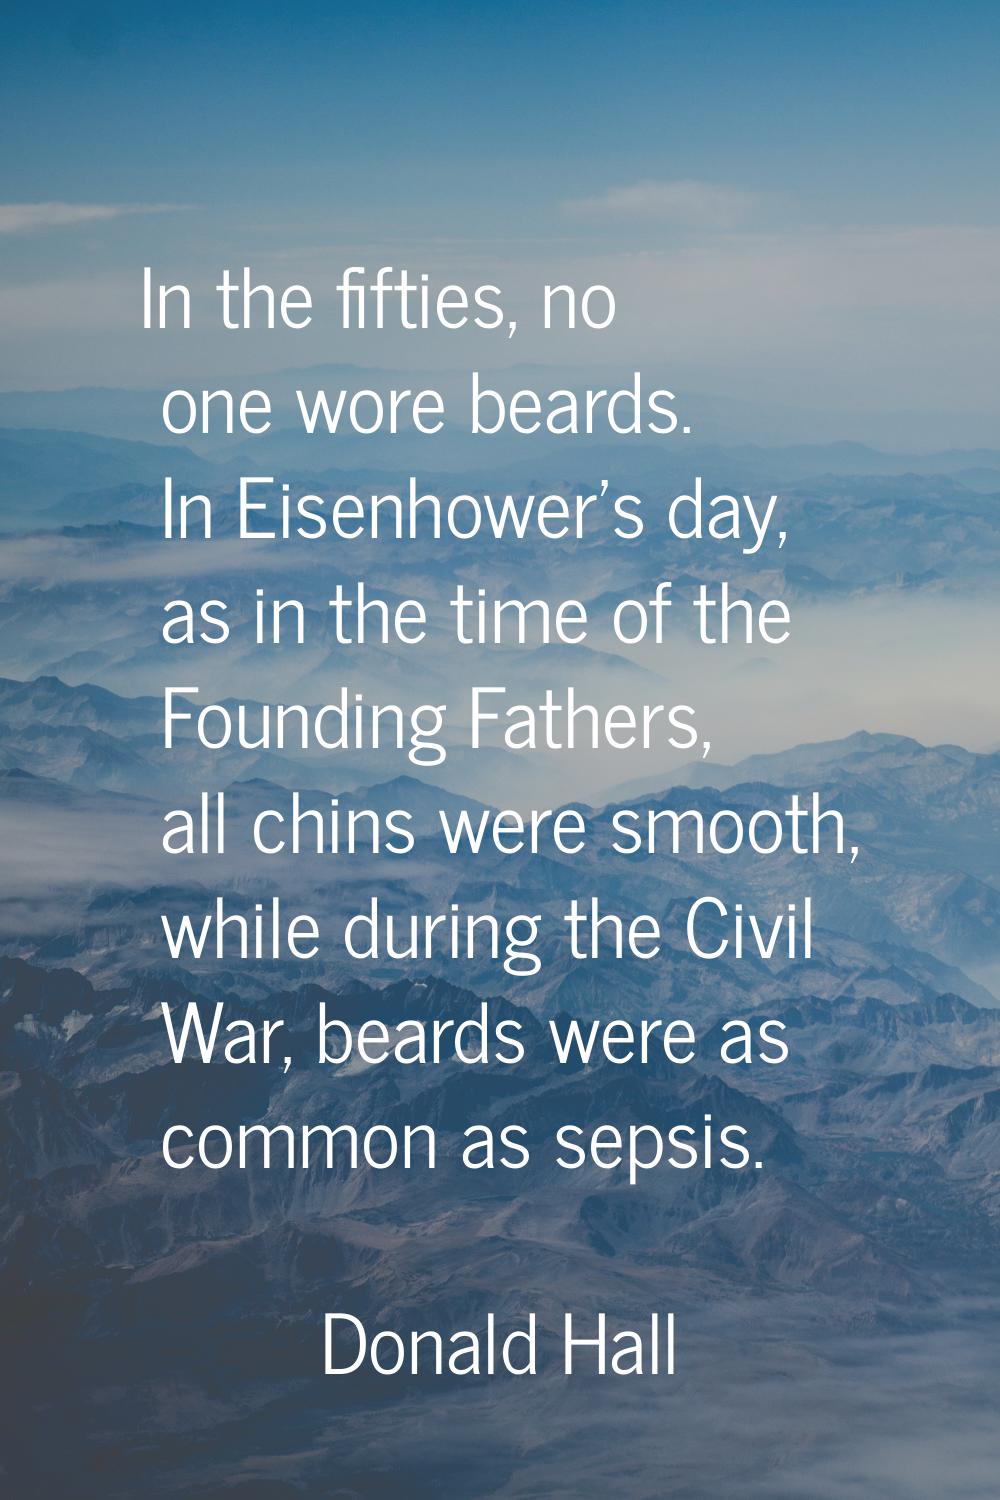 In the fifties, no one wore beards. In Eisenhower's day, as in the time of the Founding Fathers, al